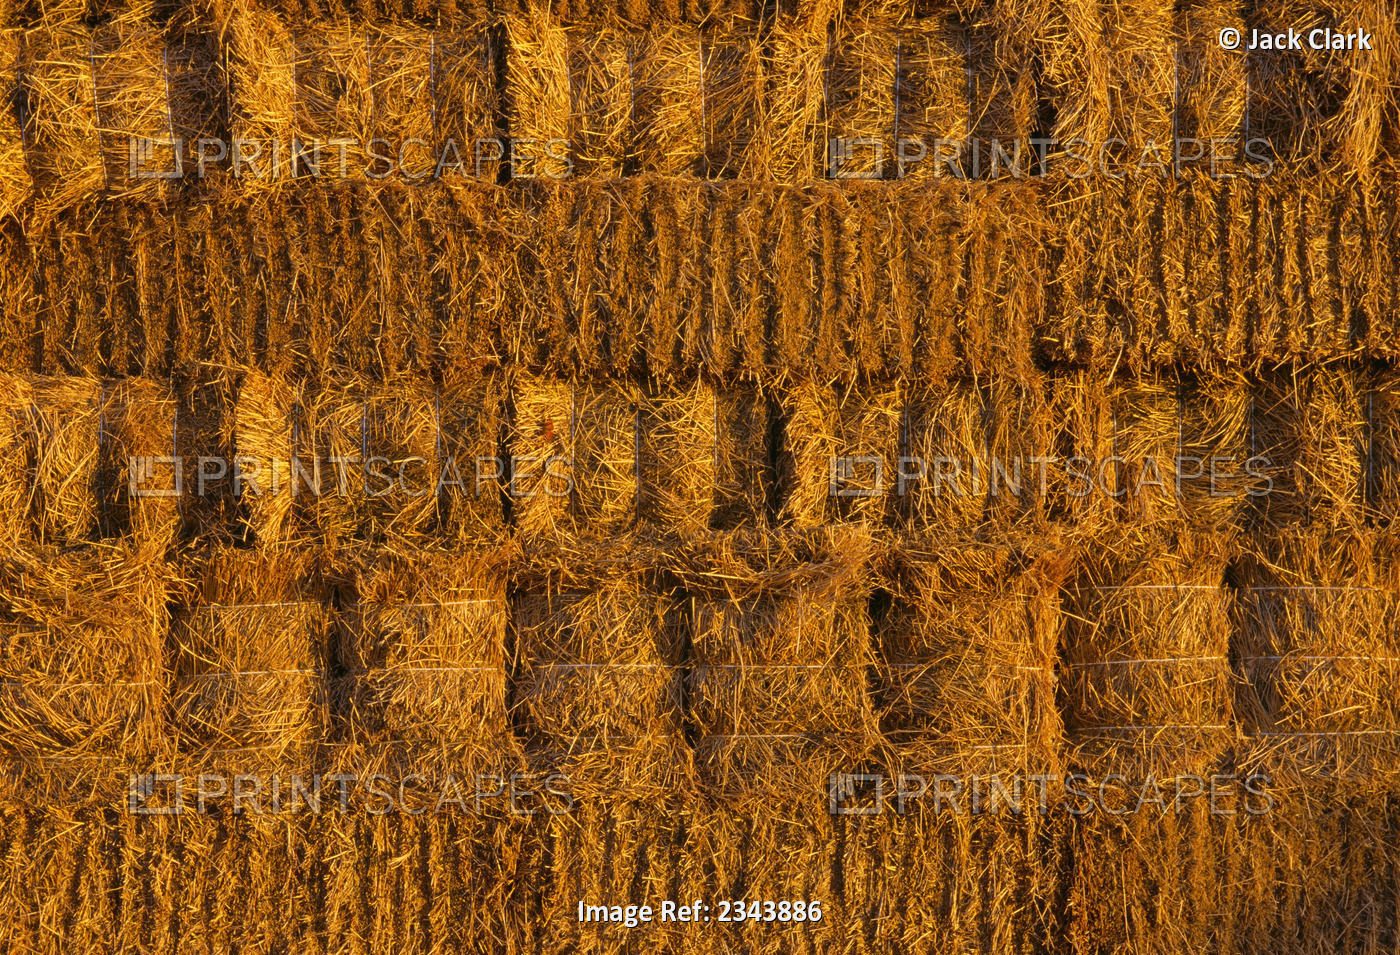 Agriculture - Alfalfa hay bales stacked up after harvest; bales will be ...